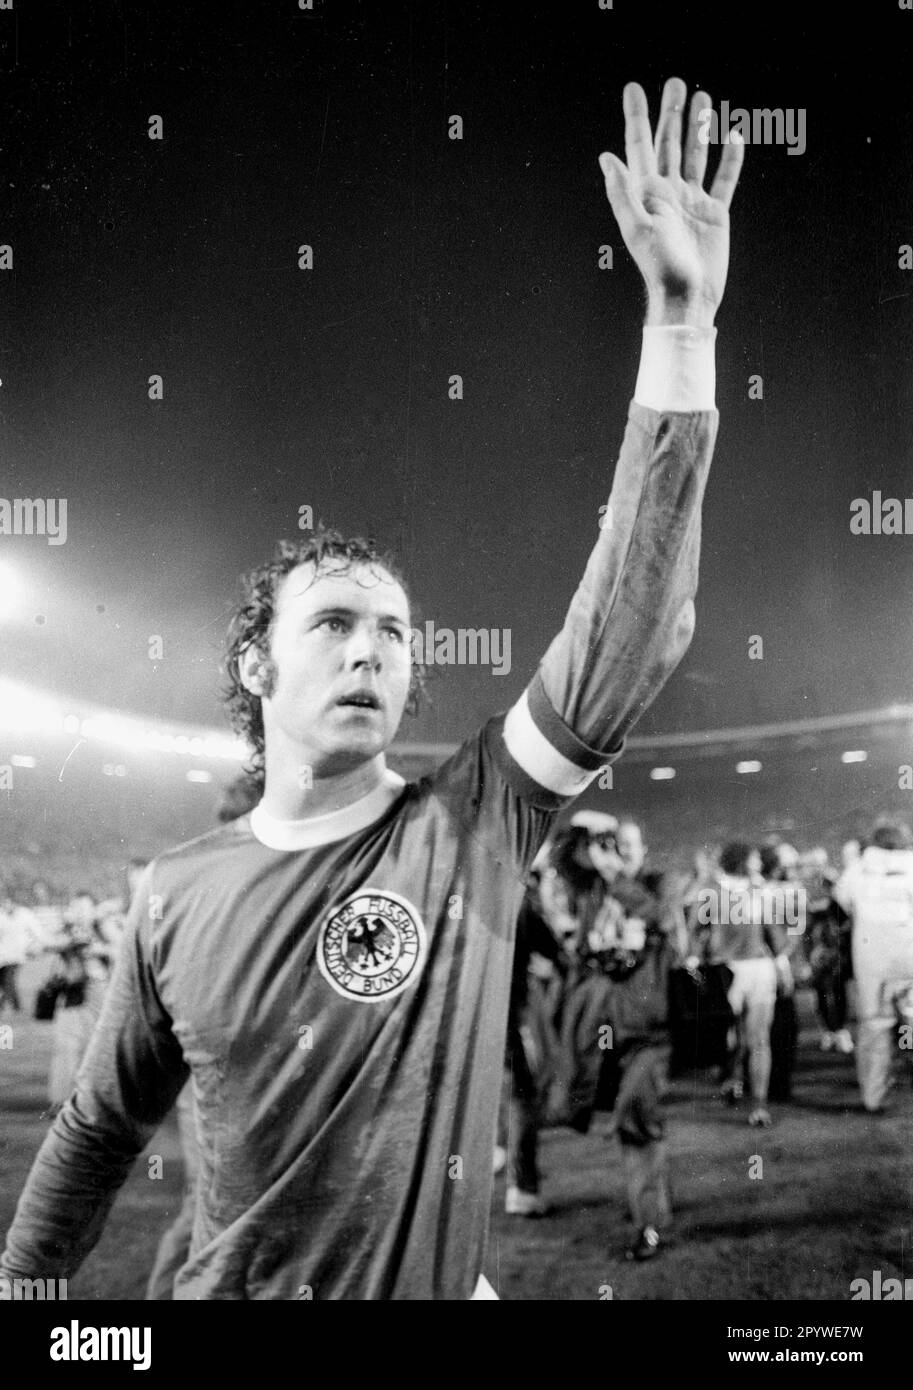 Soccer World Cup 1974 2nd round / BR Germany - Sweden 4:2 / 30.06.1974 in Duesseldorf / Franz Beckenbauer waves after the game [automated translation] Stock Photo